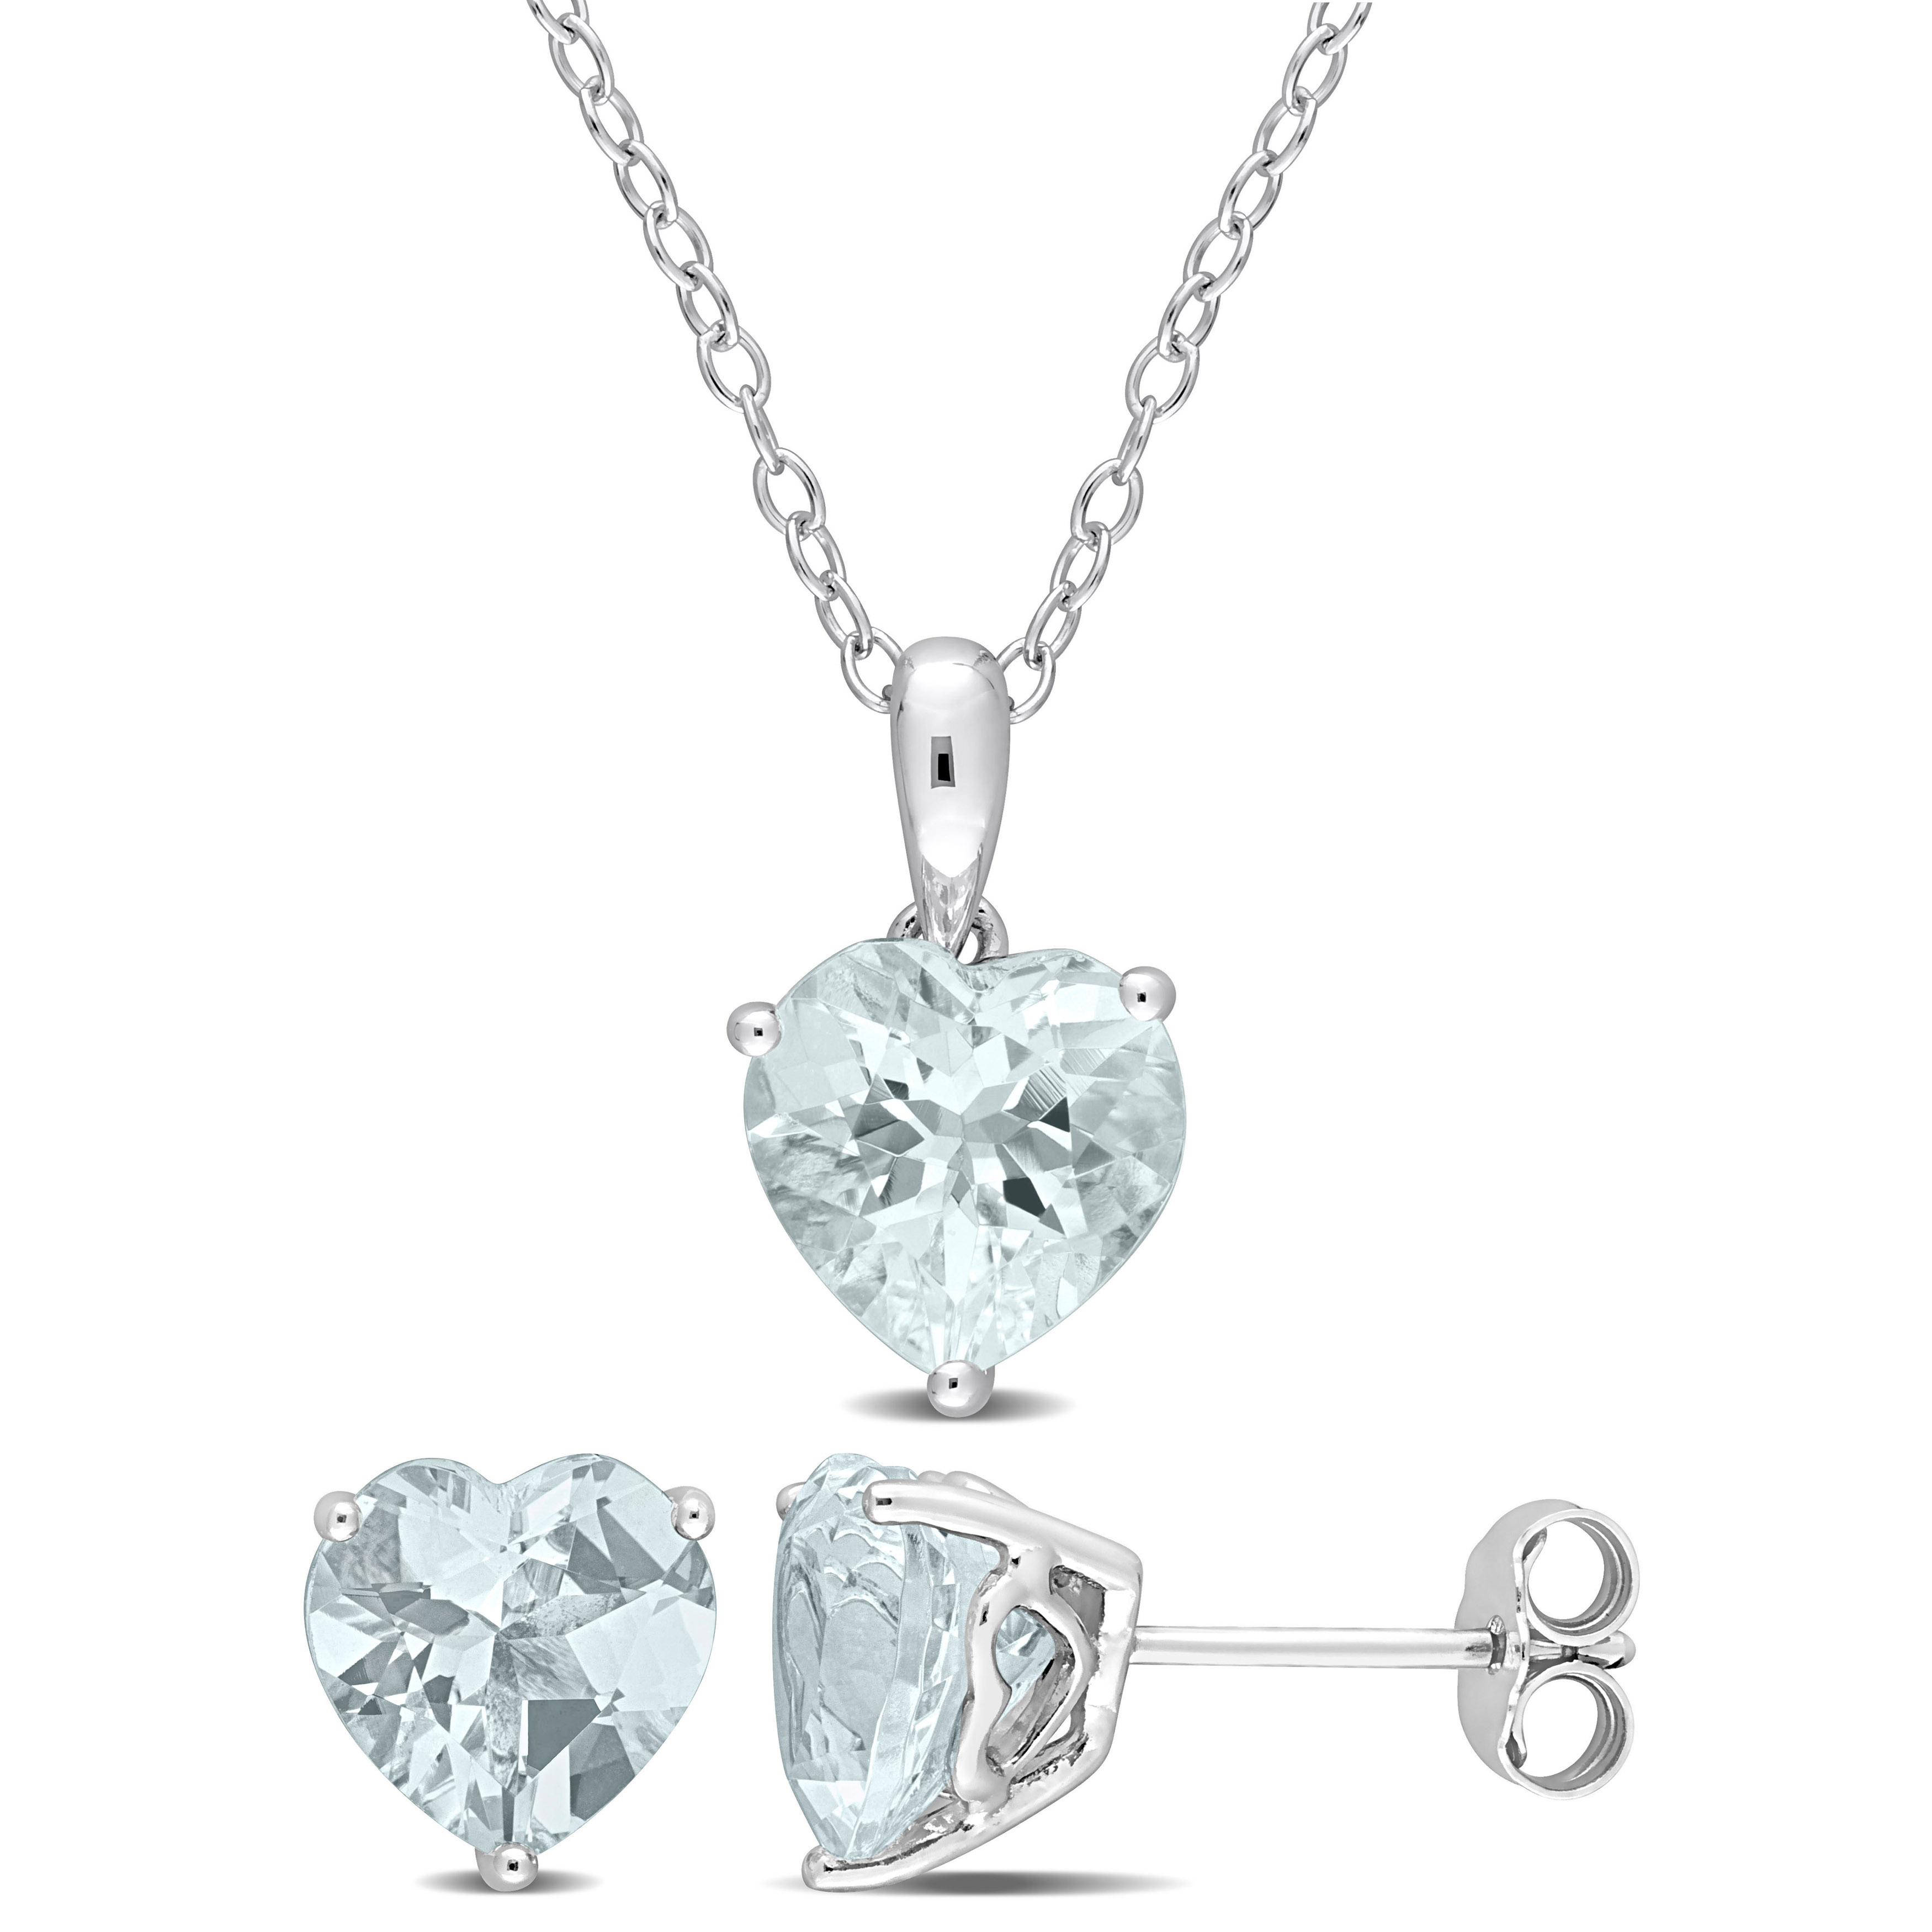 4 1/2 CT TGW Heart-Shape Aquamarine 2-Piece Set of Pendant with Chain and Earrings in Sterling Silver